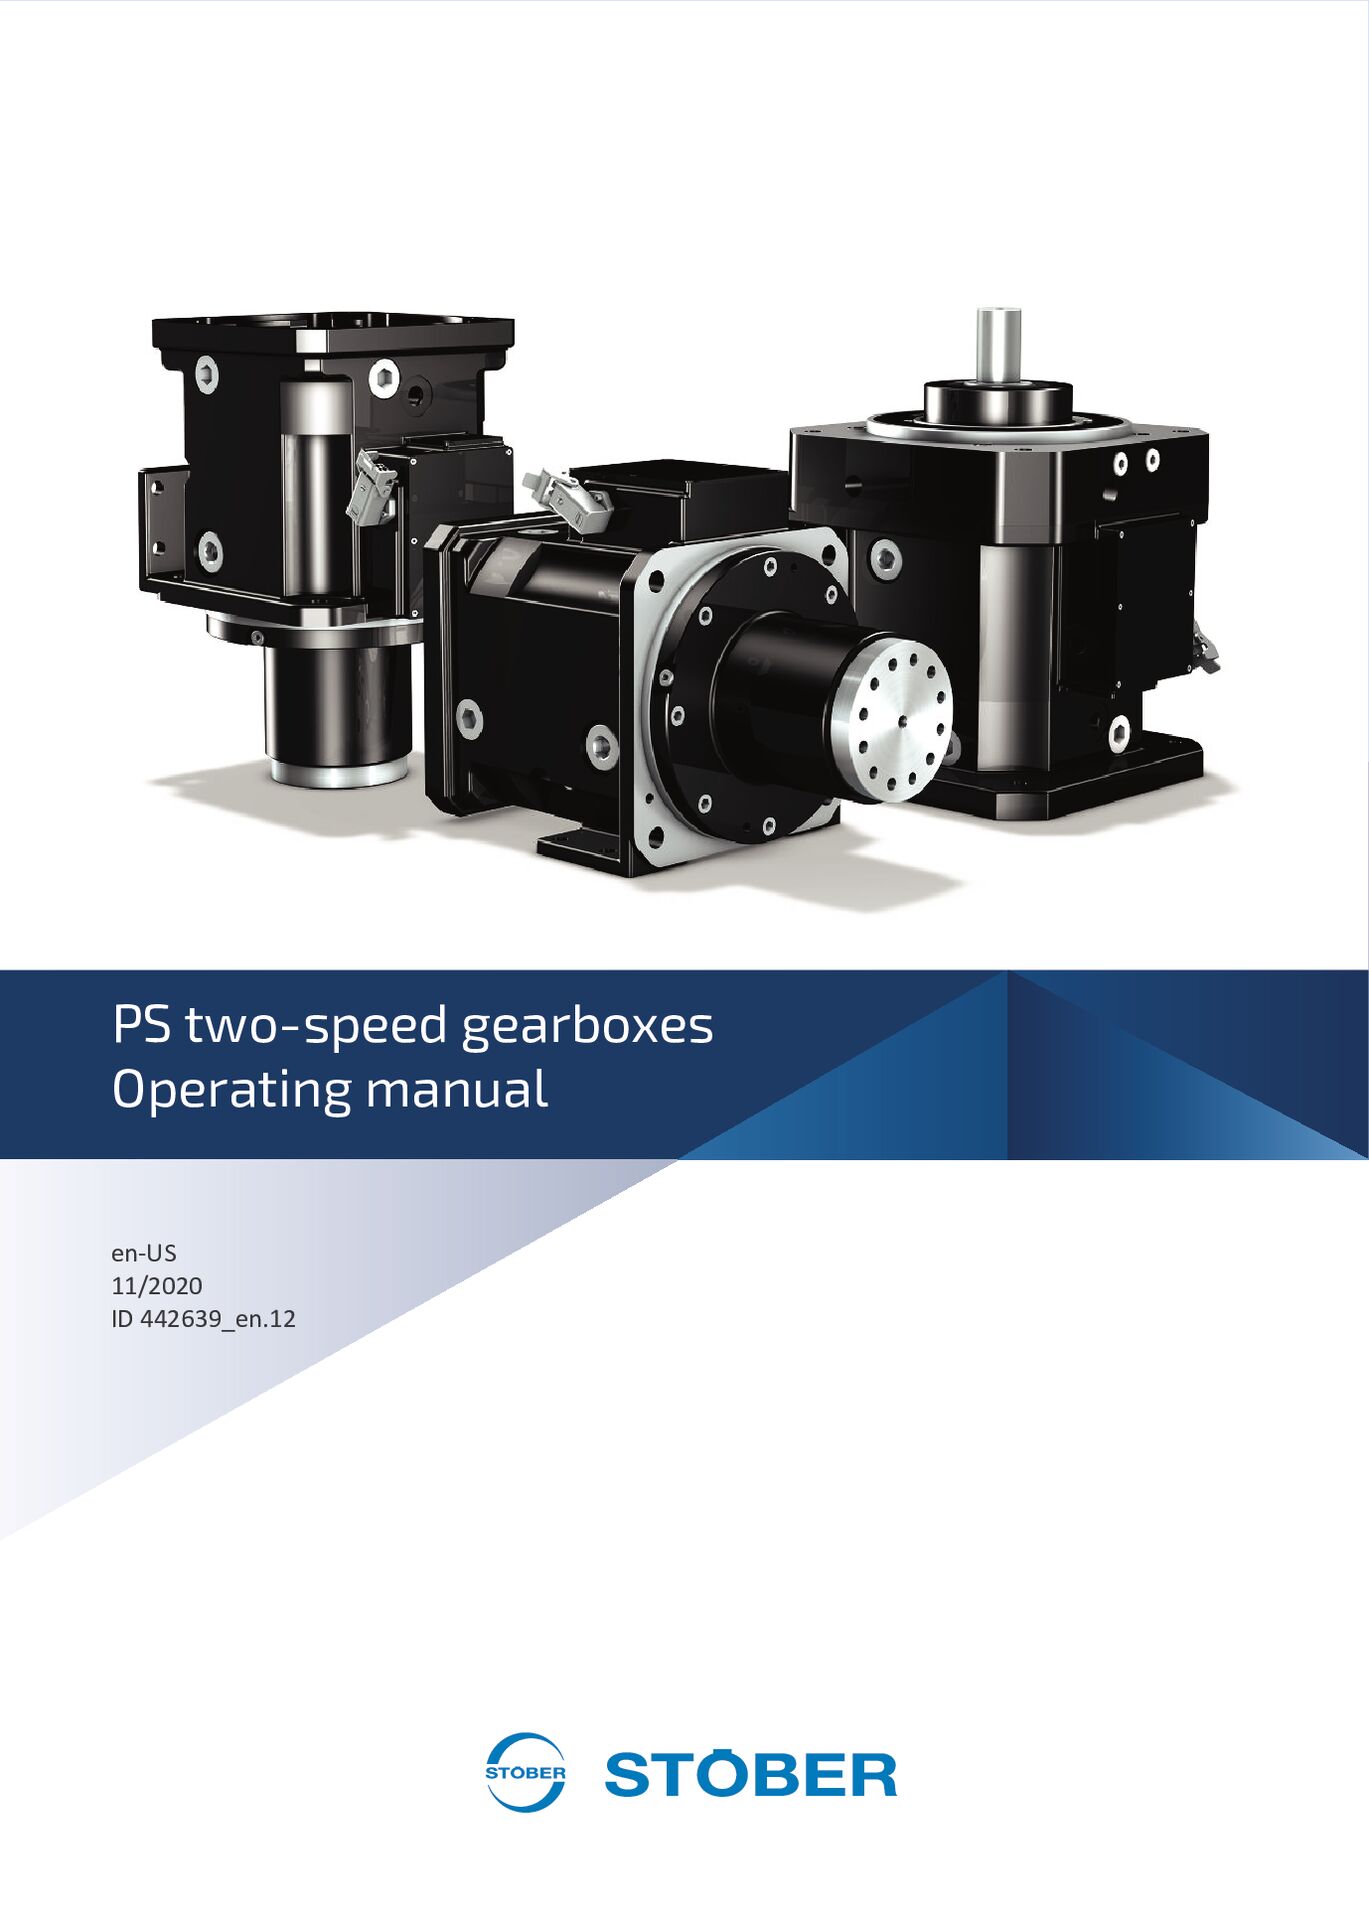 Operating manual PS two-speed gearboxes